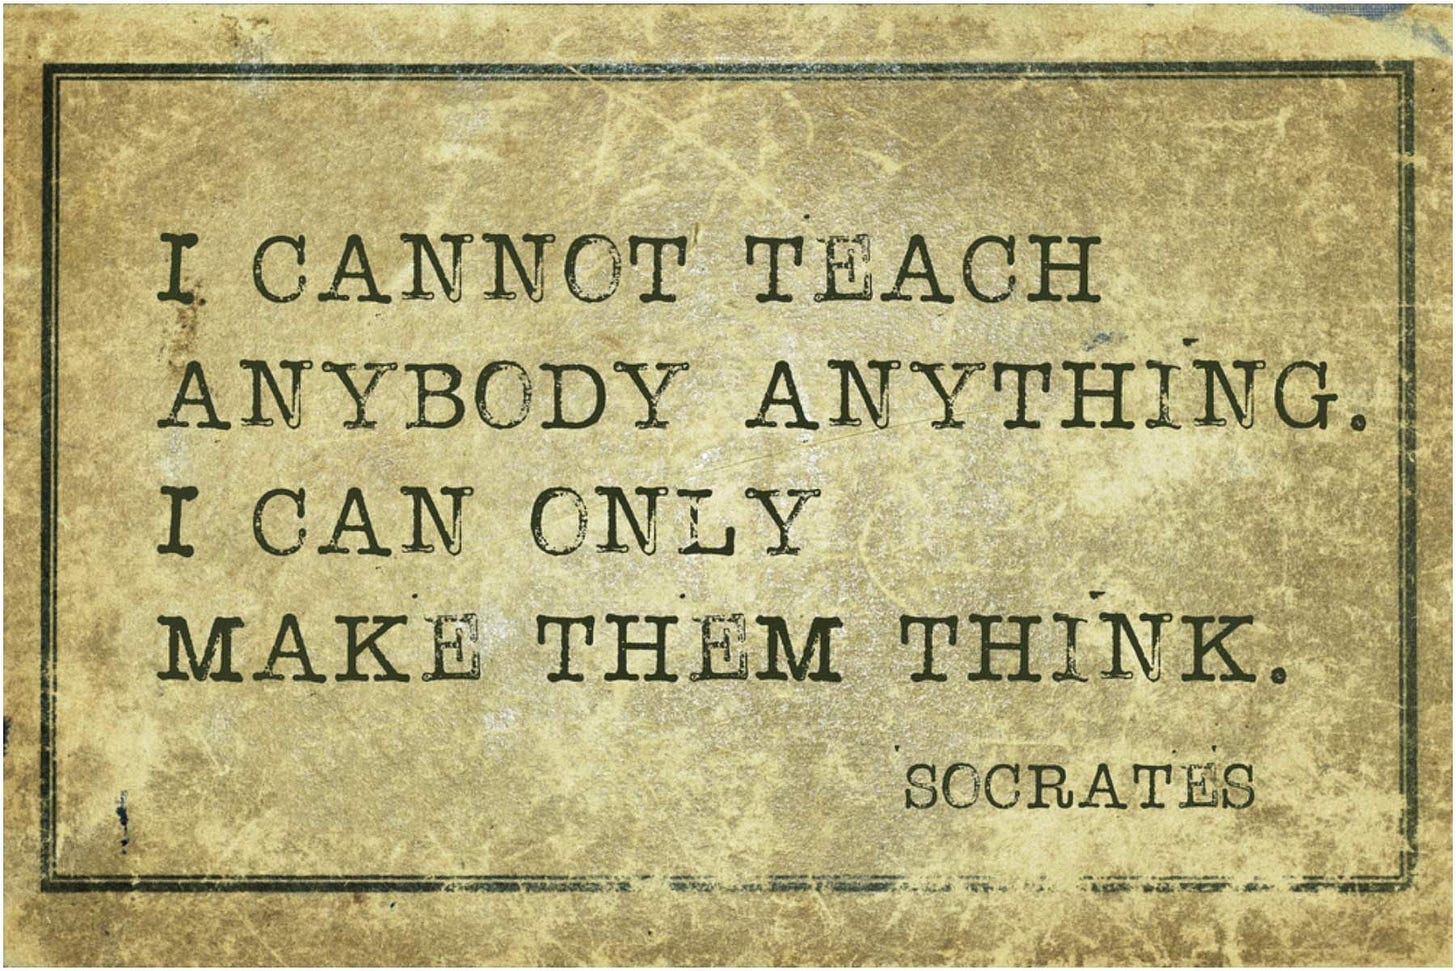 38 Socrates Quotes On Change, Life, And Education - Insight state